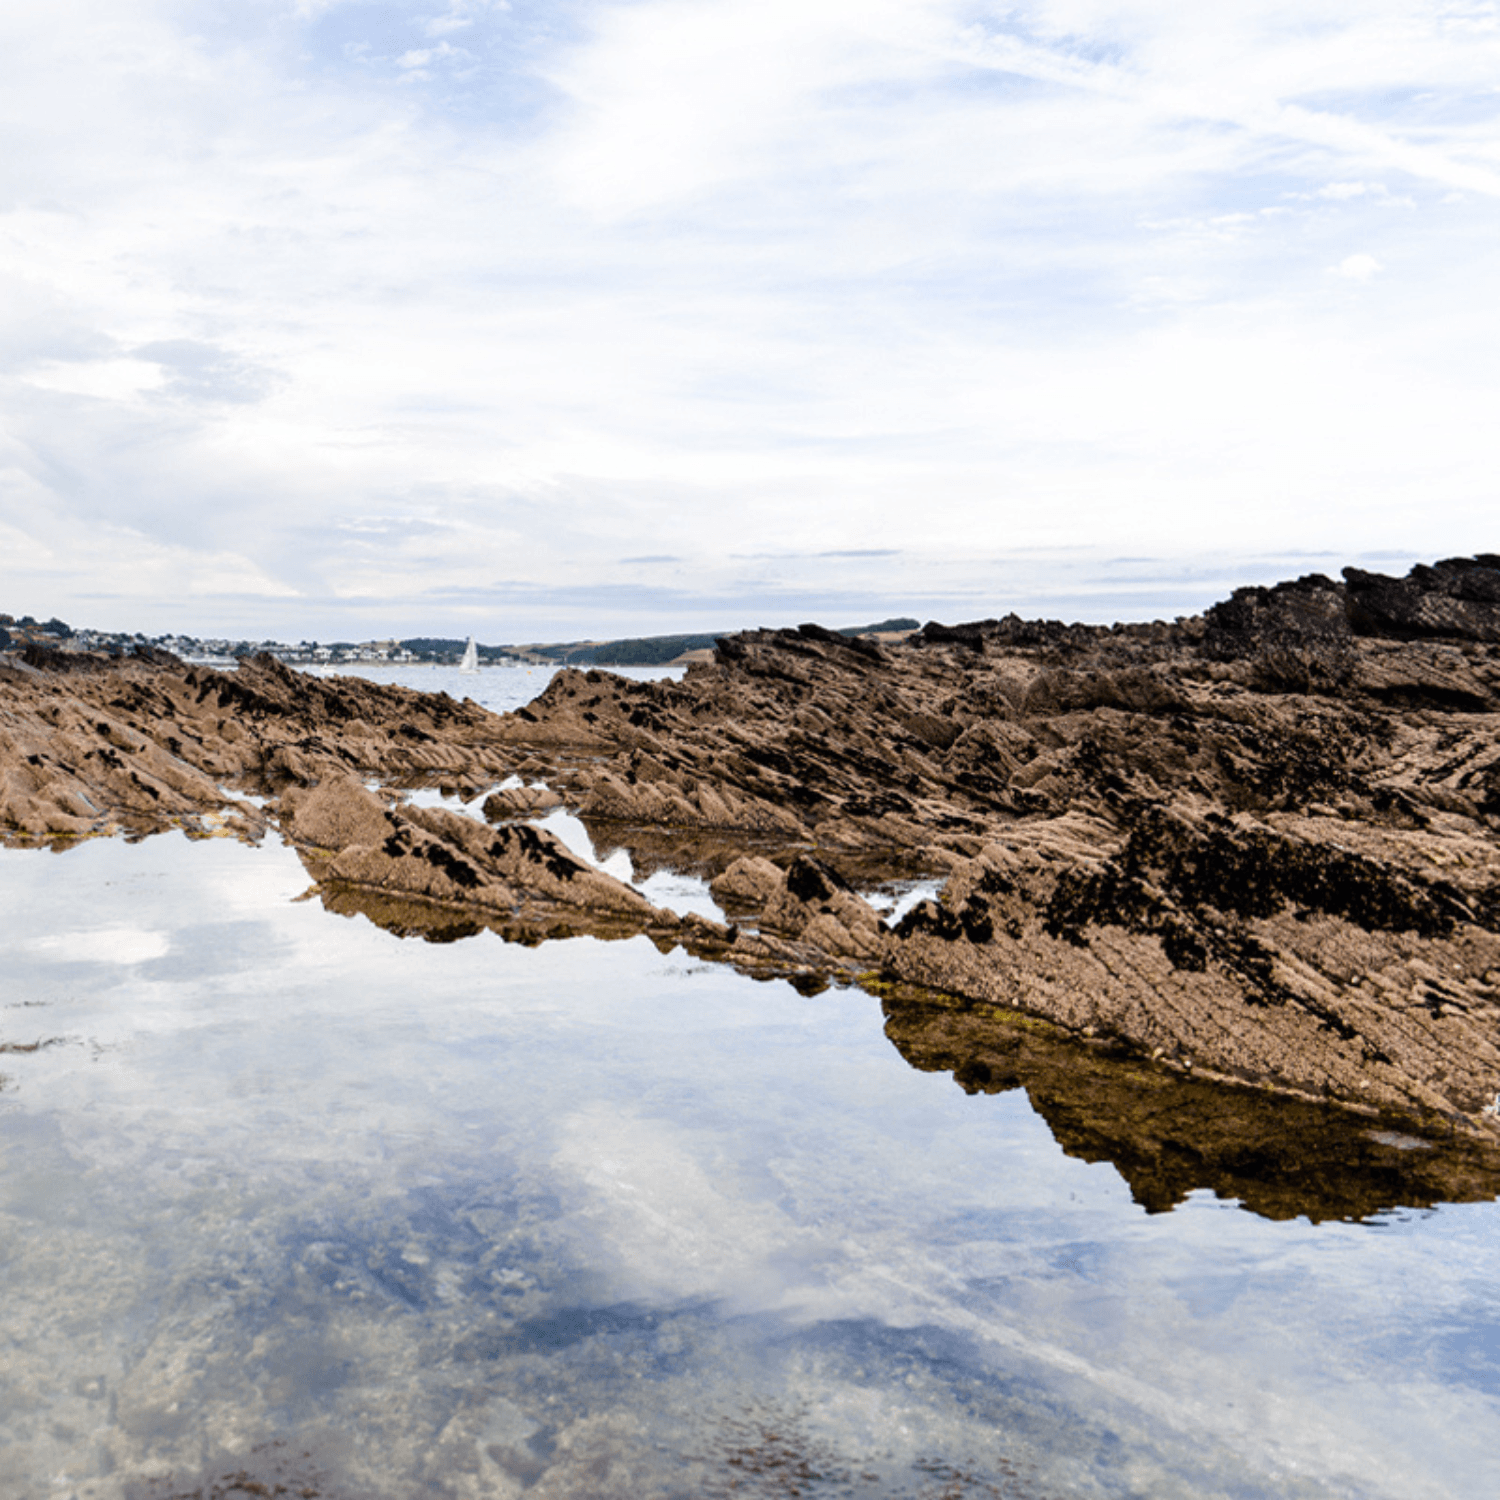 Tidal pool with brown rocks covered in limpets and mussels, with cloudy sky reflected in water.